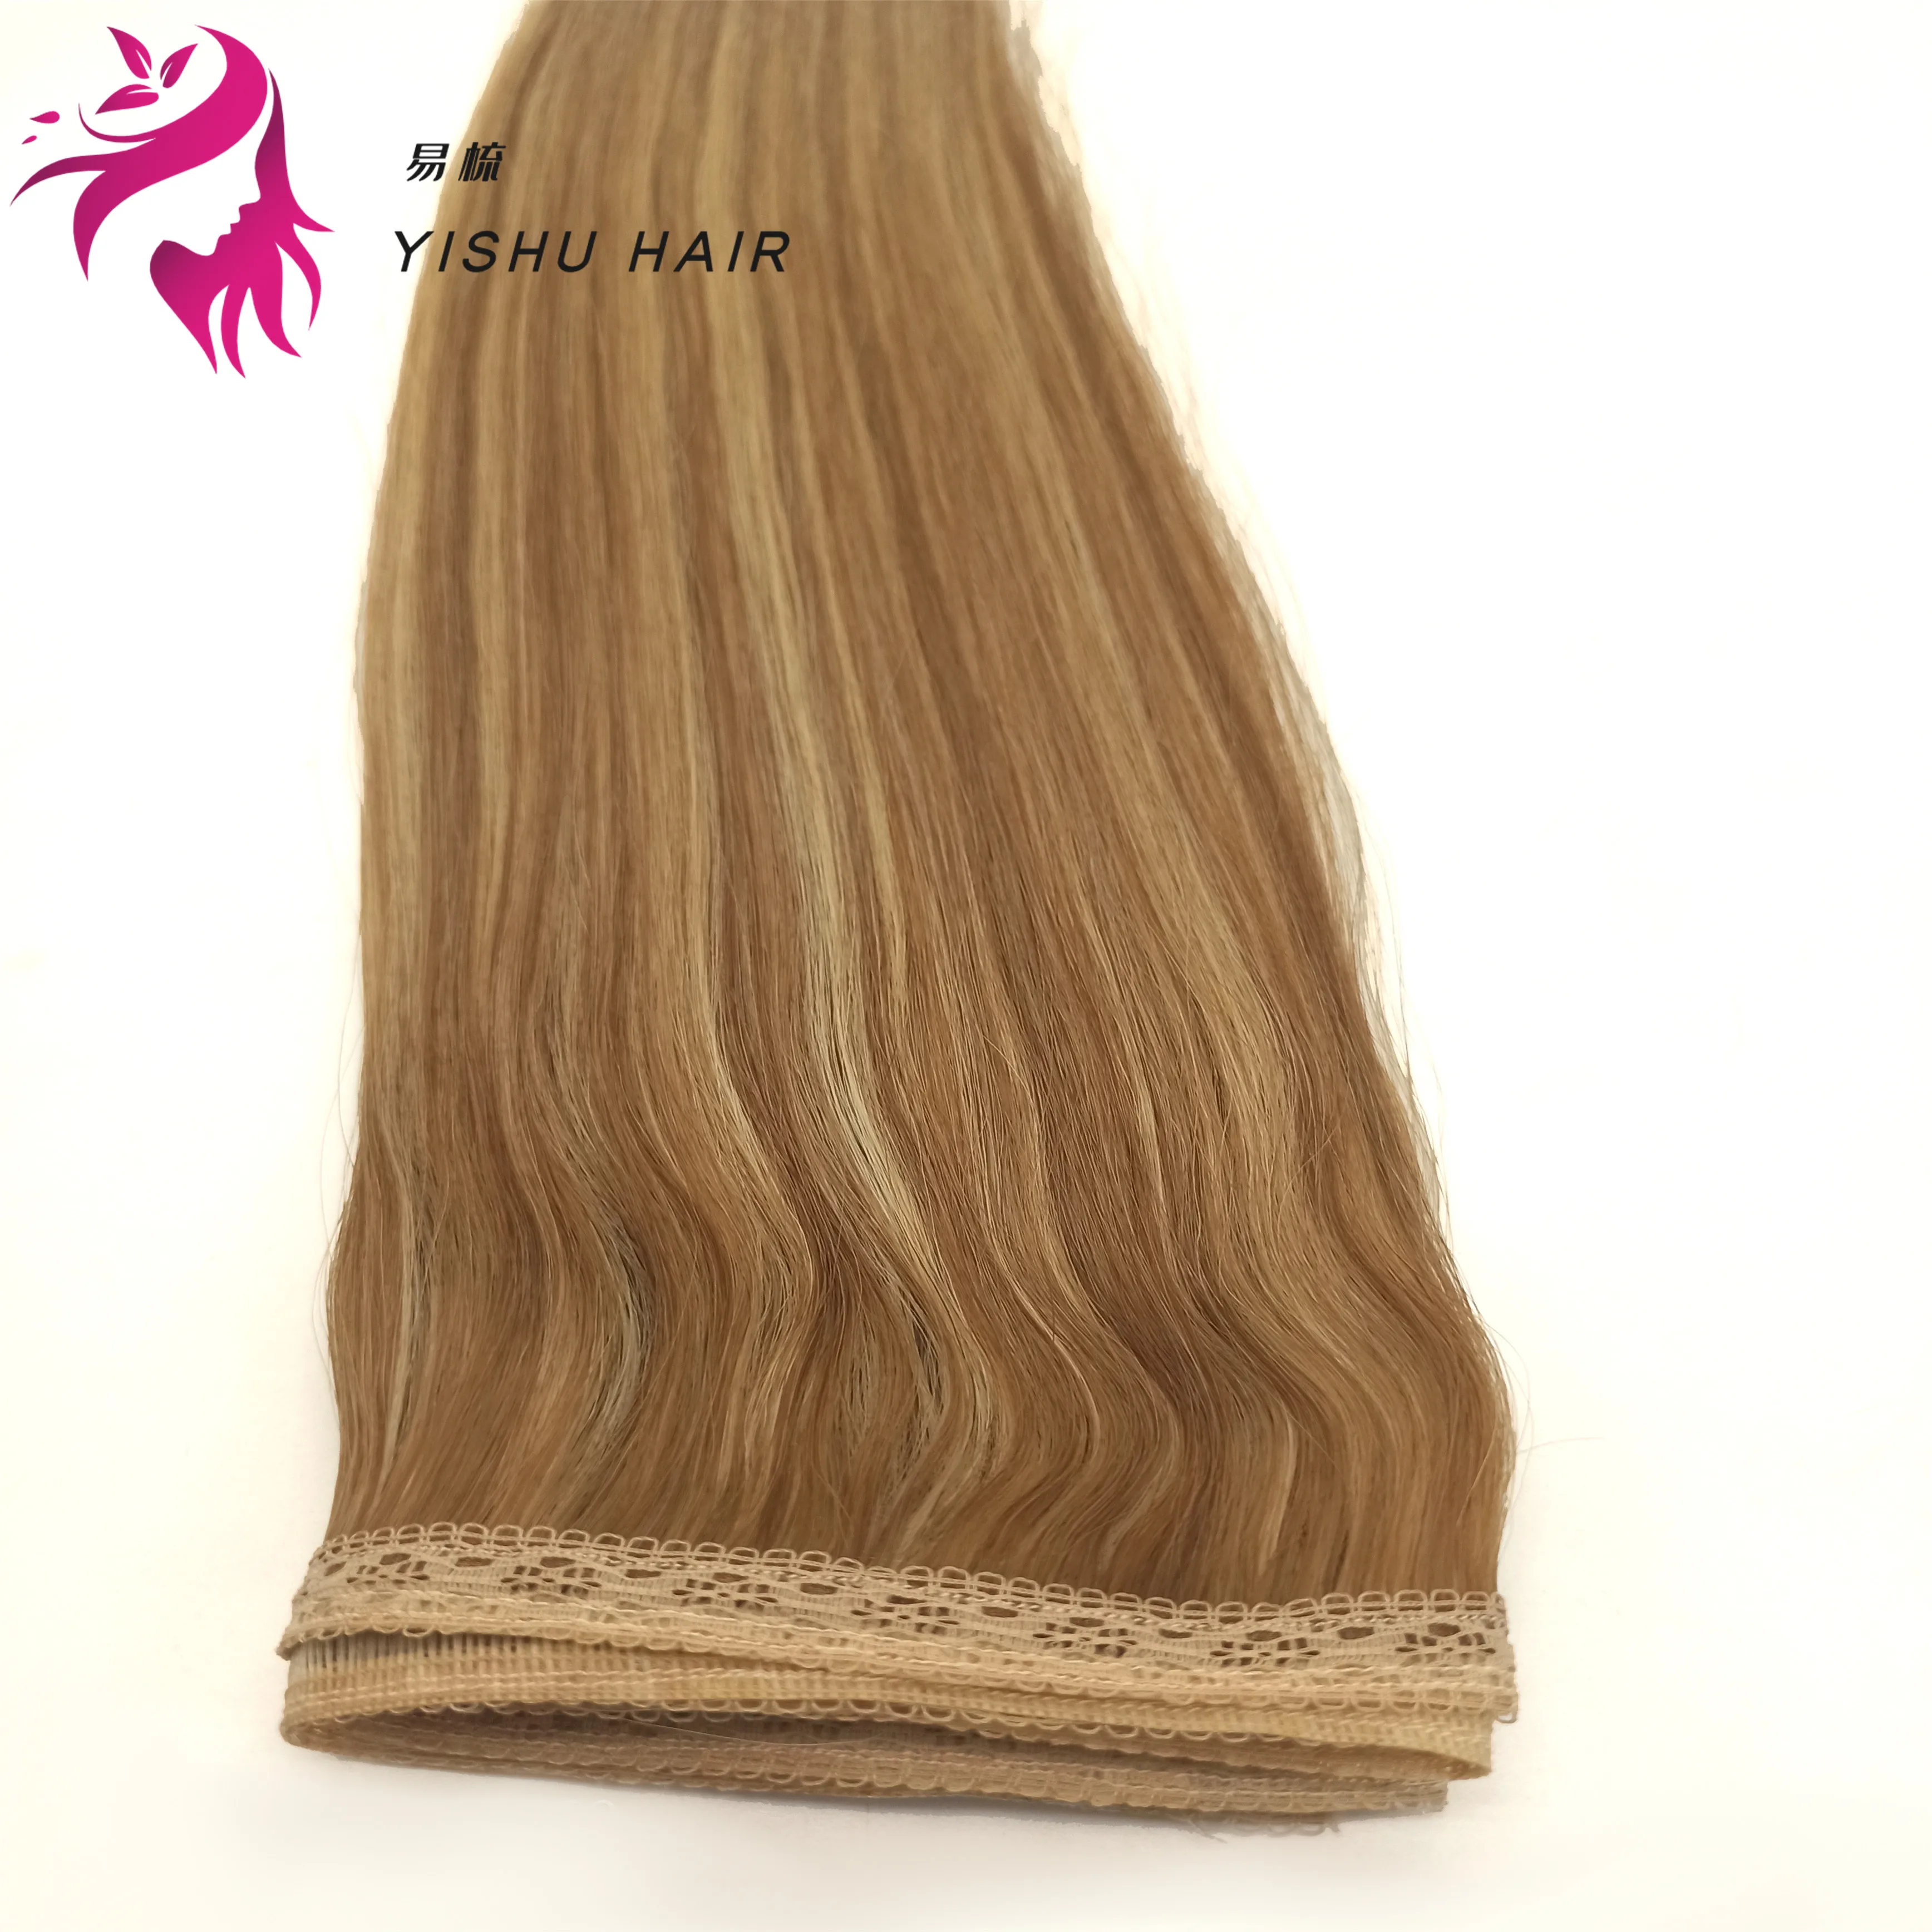 

News Popular Hair weft Human Remy quality 613# 60 Human Double deck hair Weft Extension with lace, All color can do